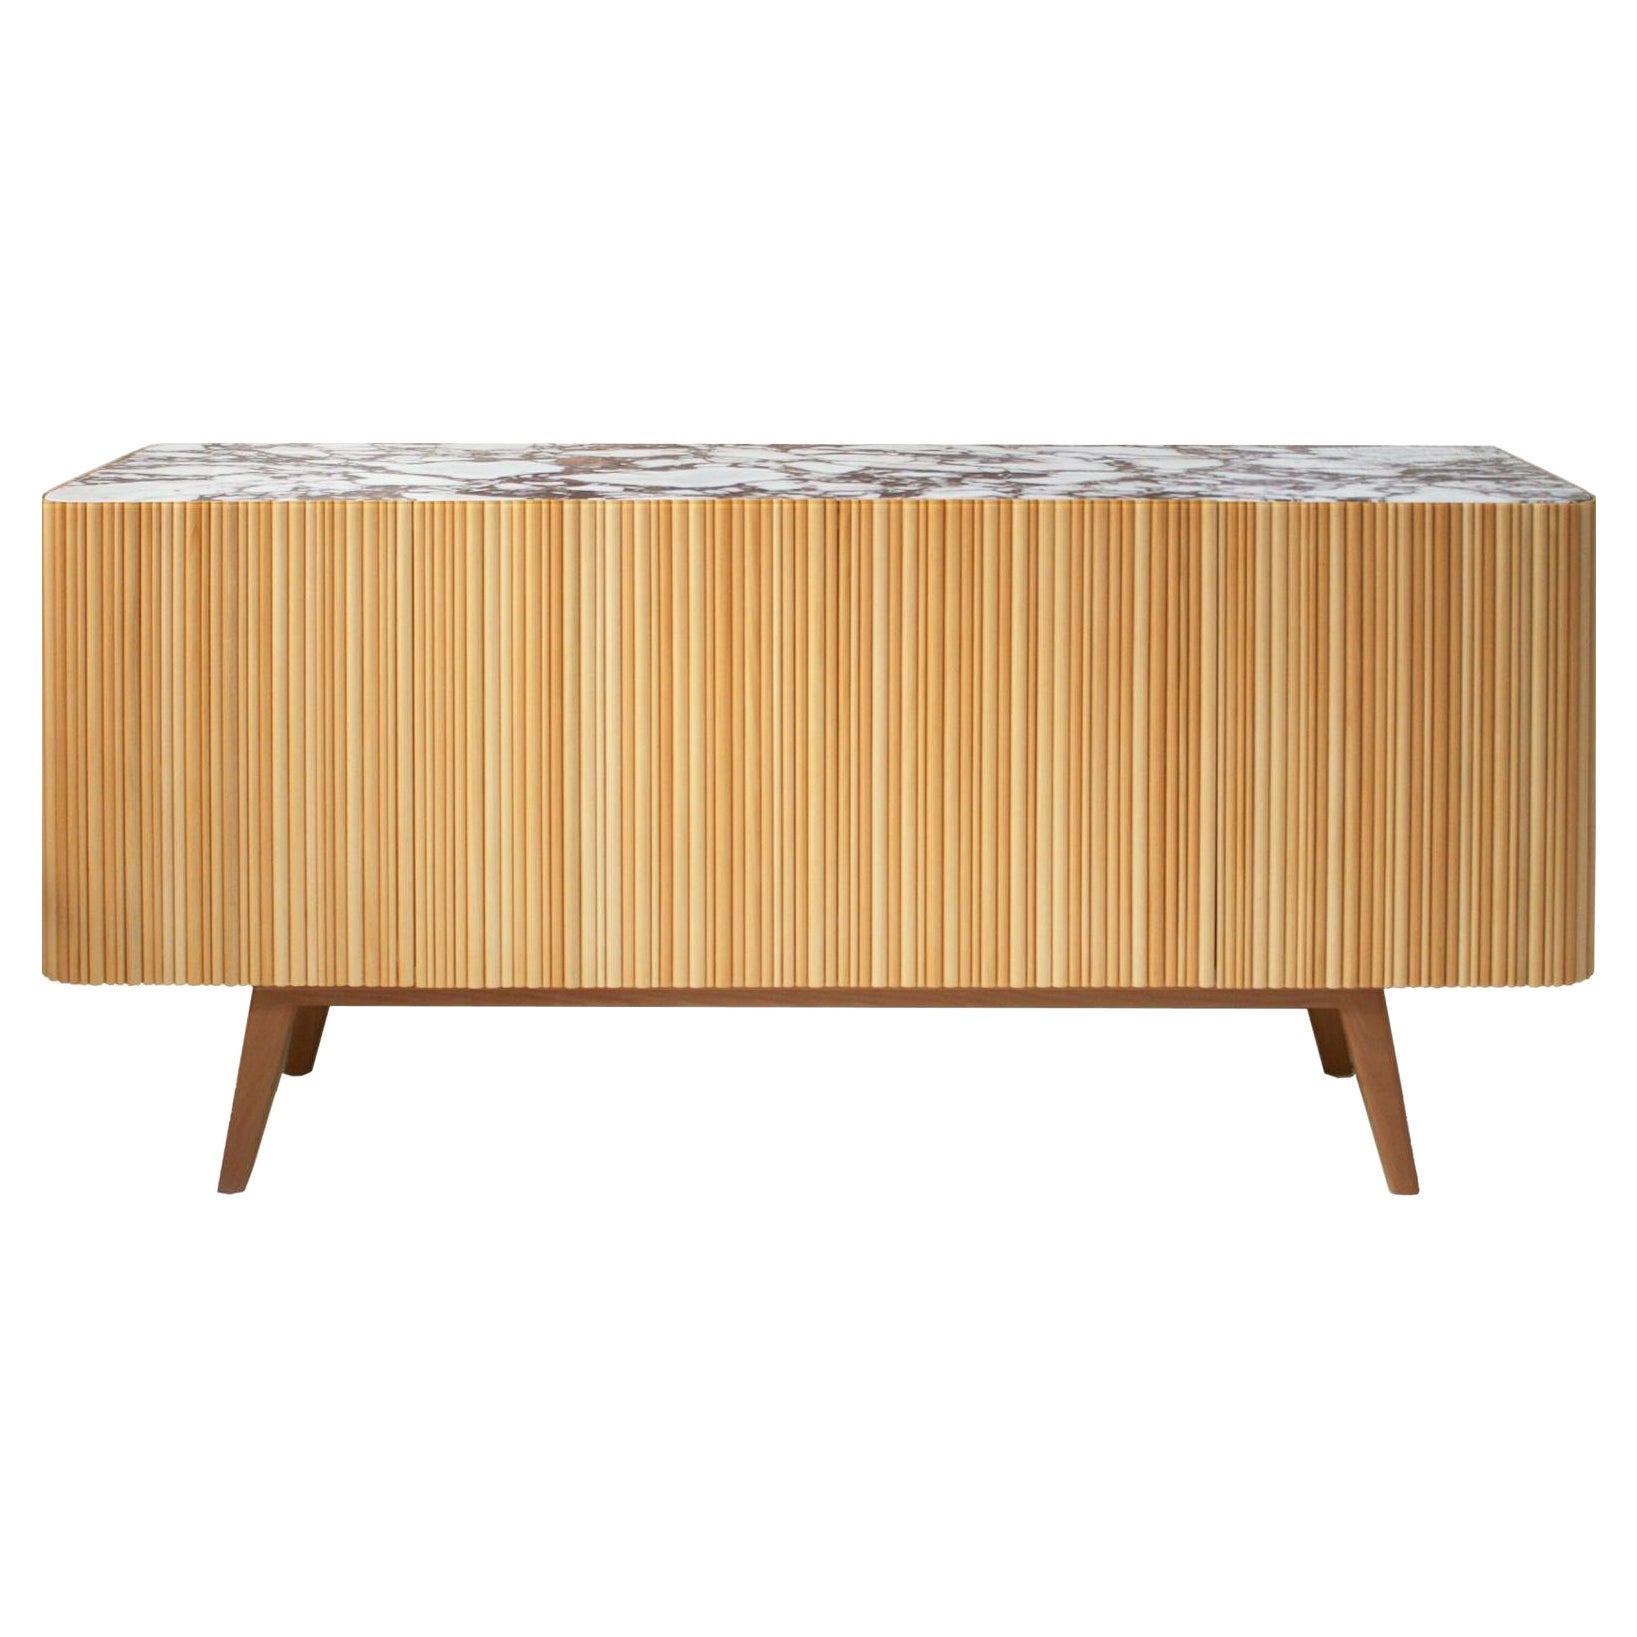 L.A. Studio Contemporary Modern Linden and Lemongrass Wood Sideboard For Sale